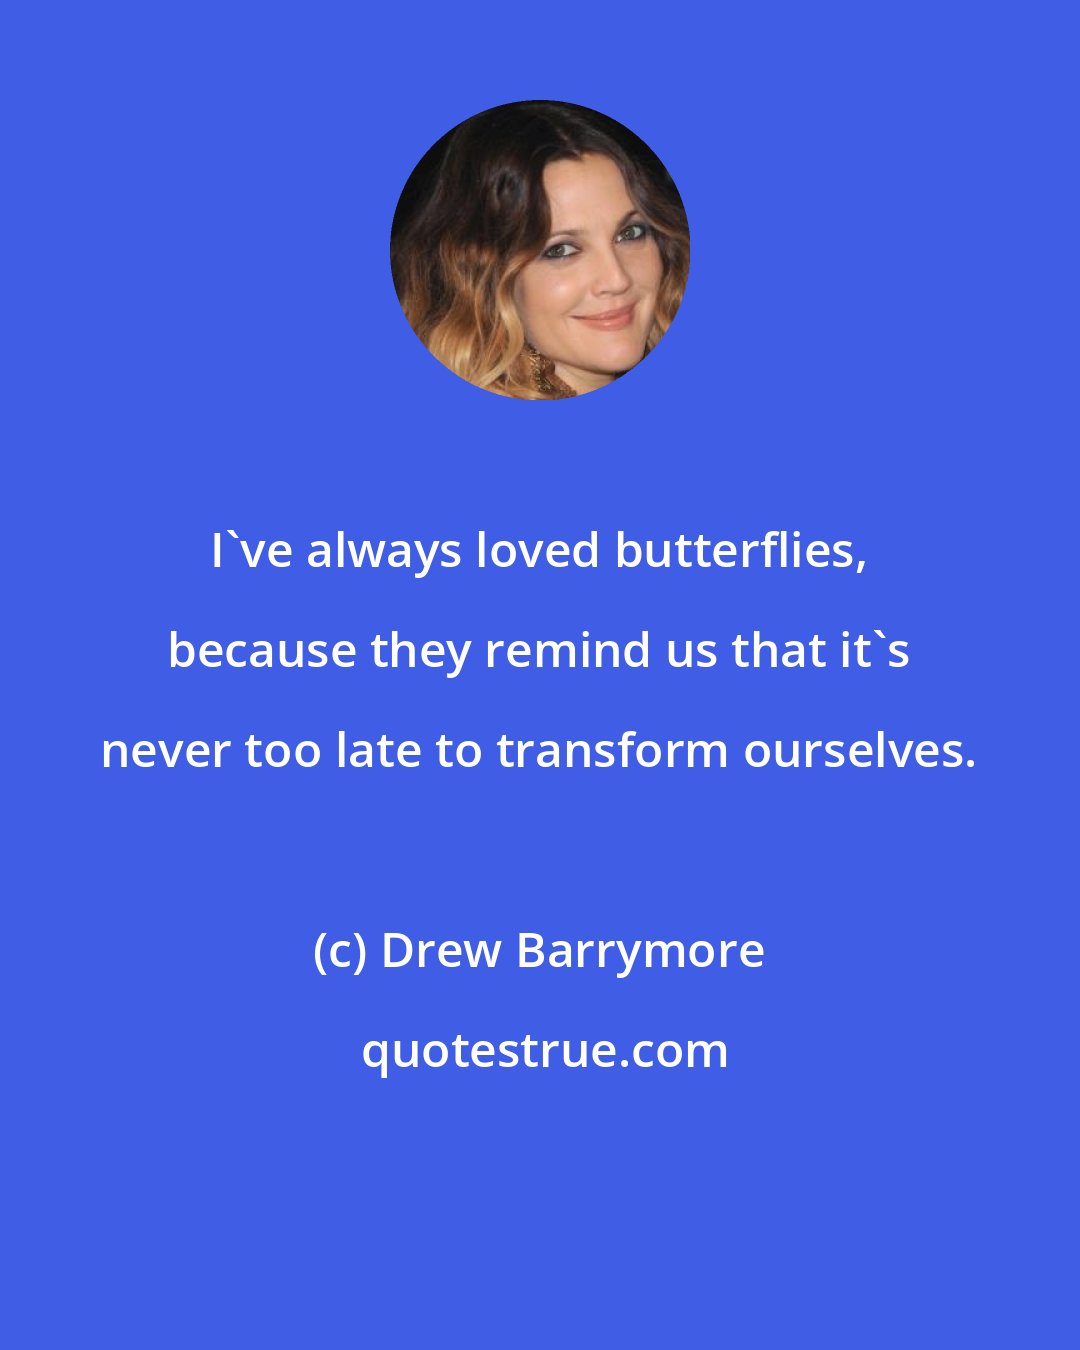 Drew Barrymore: I've always loved butterflies, because they remind us that it's never too late to transform ourselves.